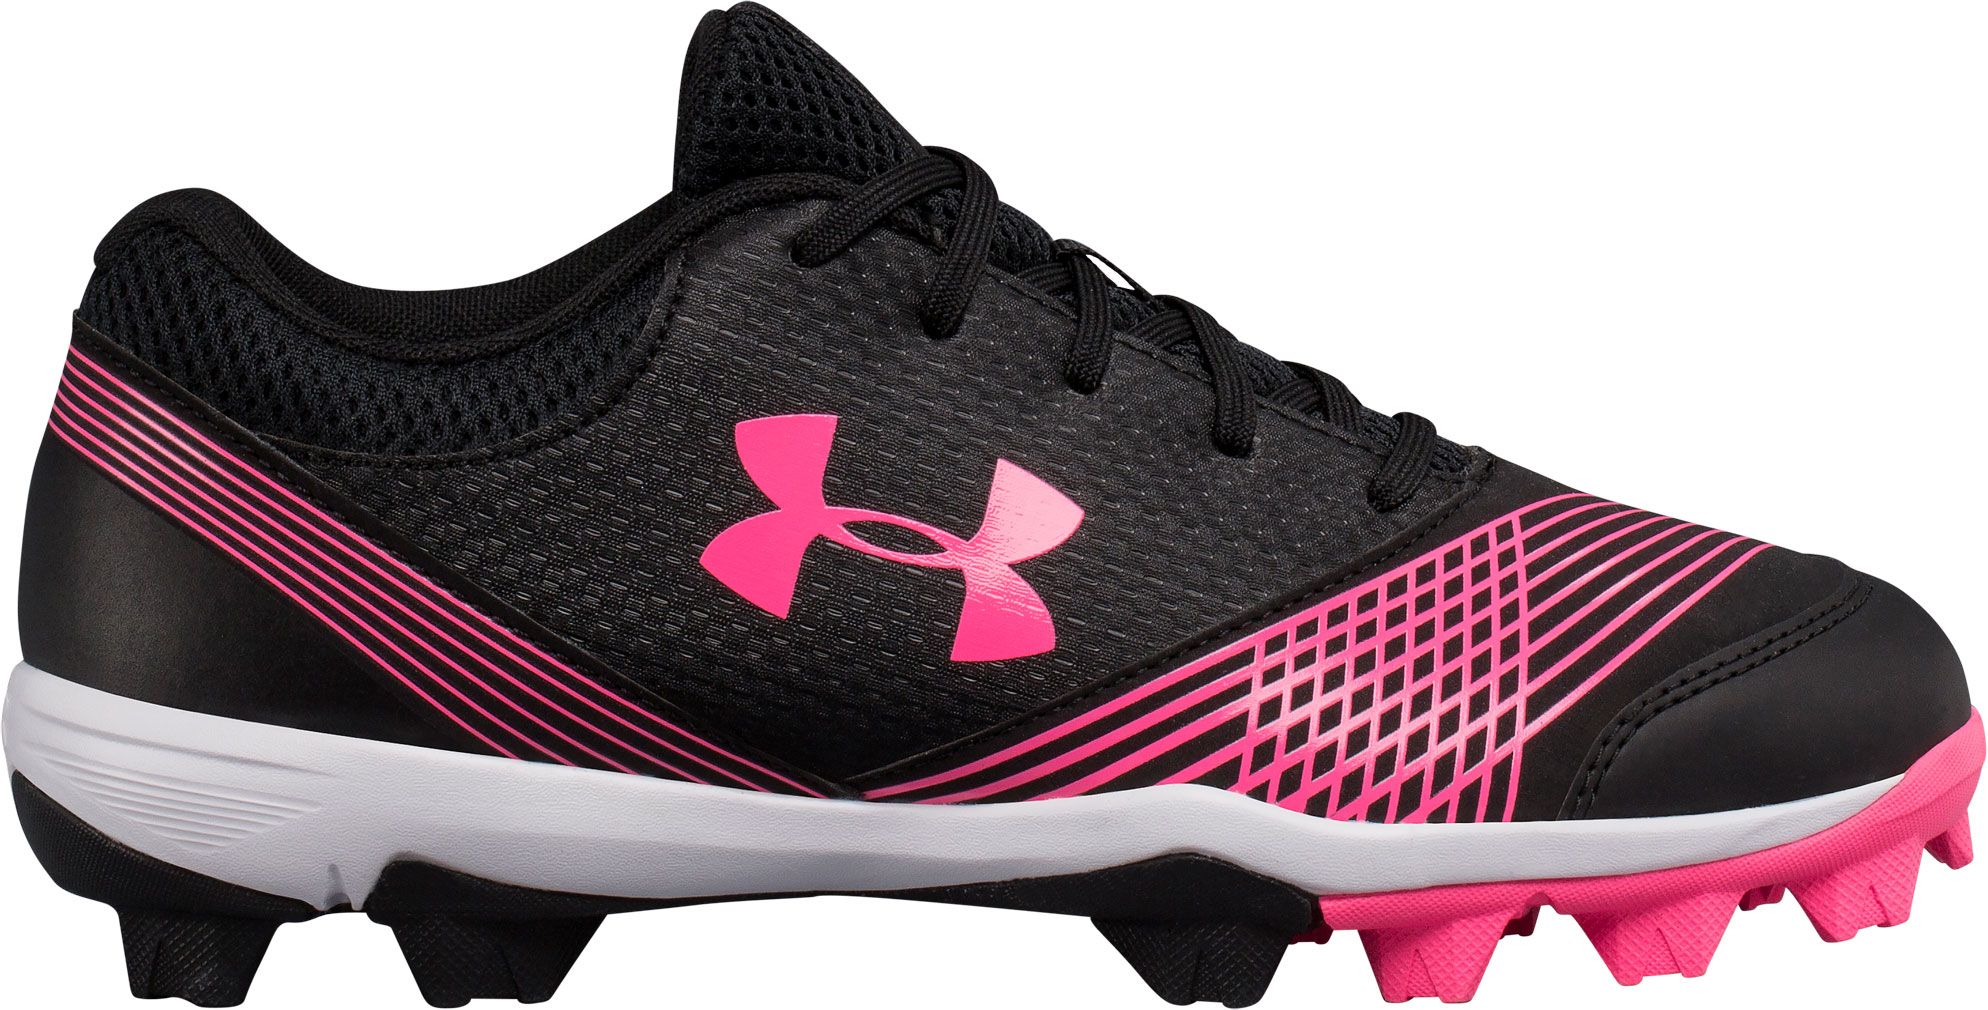 Ajh Under Armour Rugby Boots Pink, Black And Pink Rugby Boots